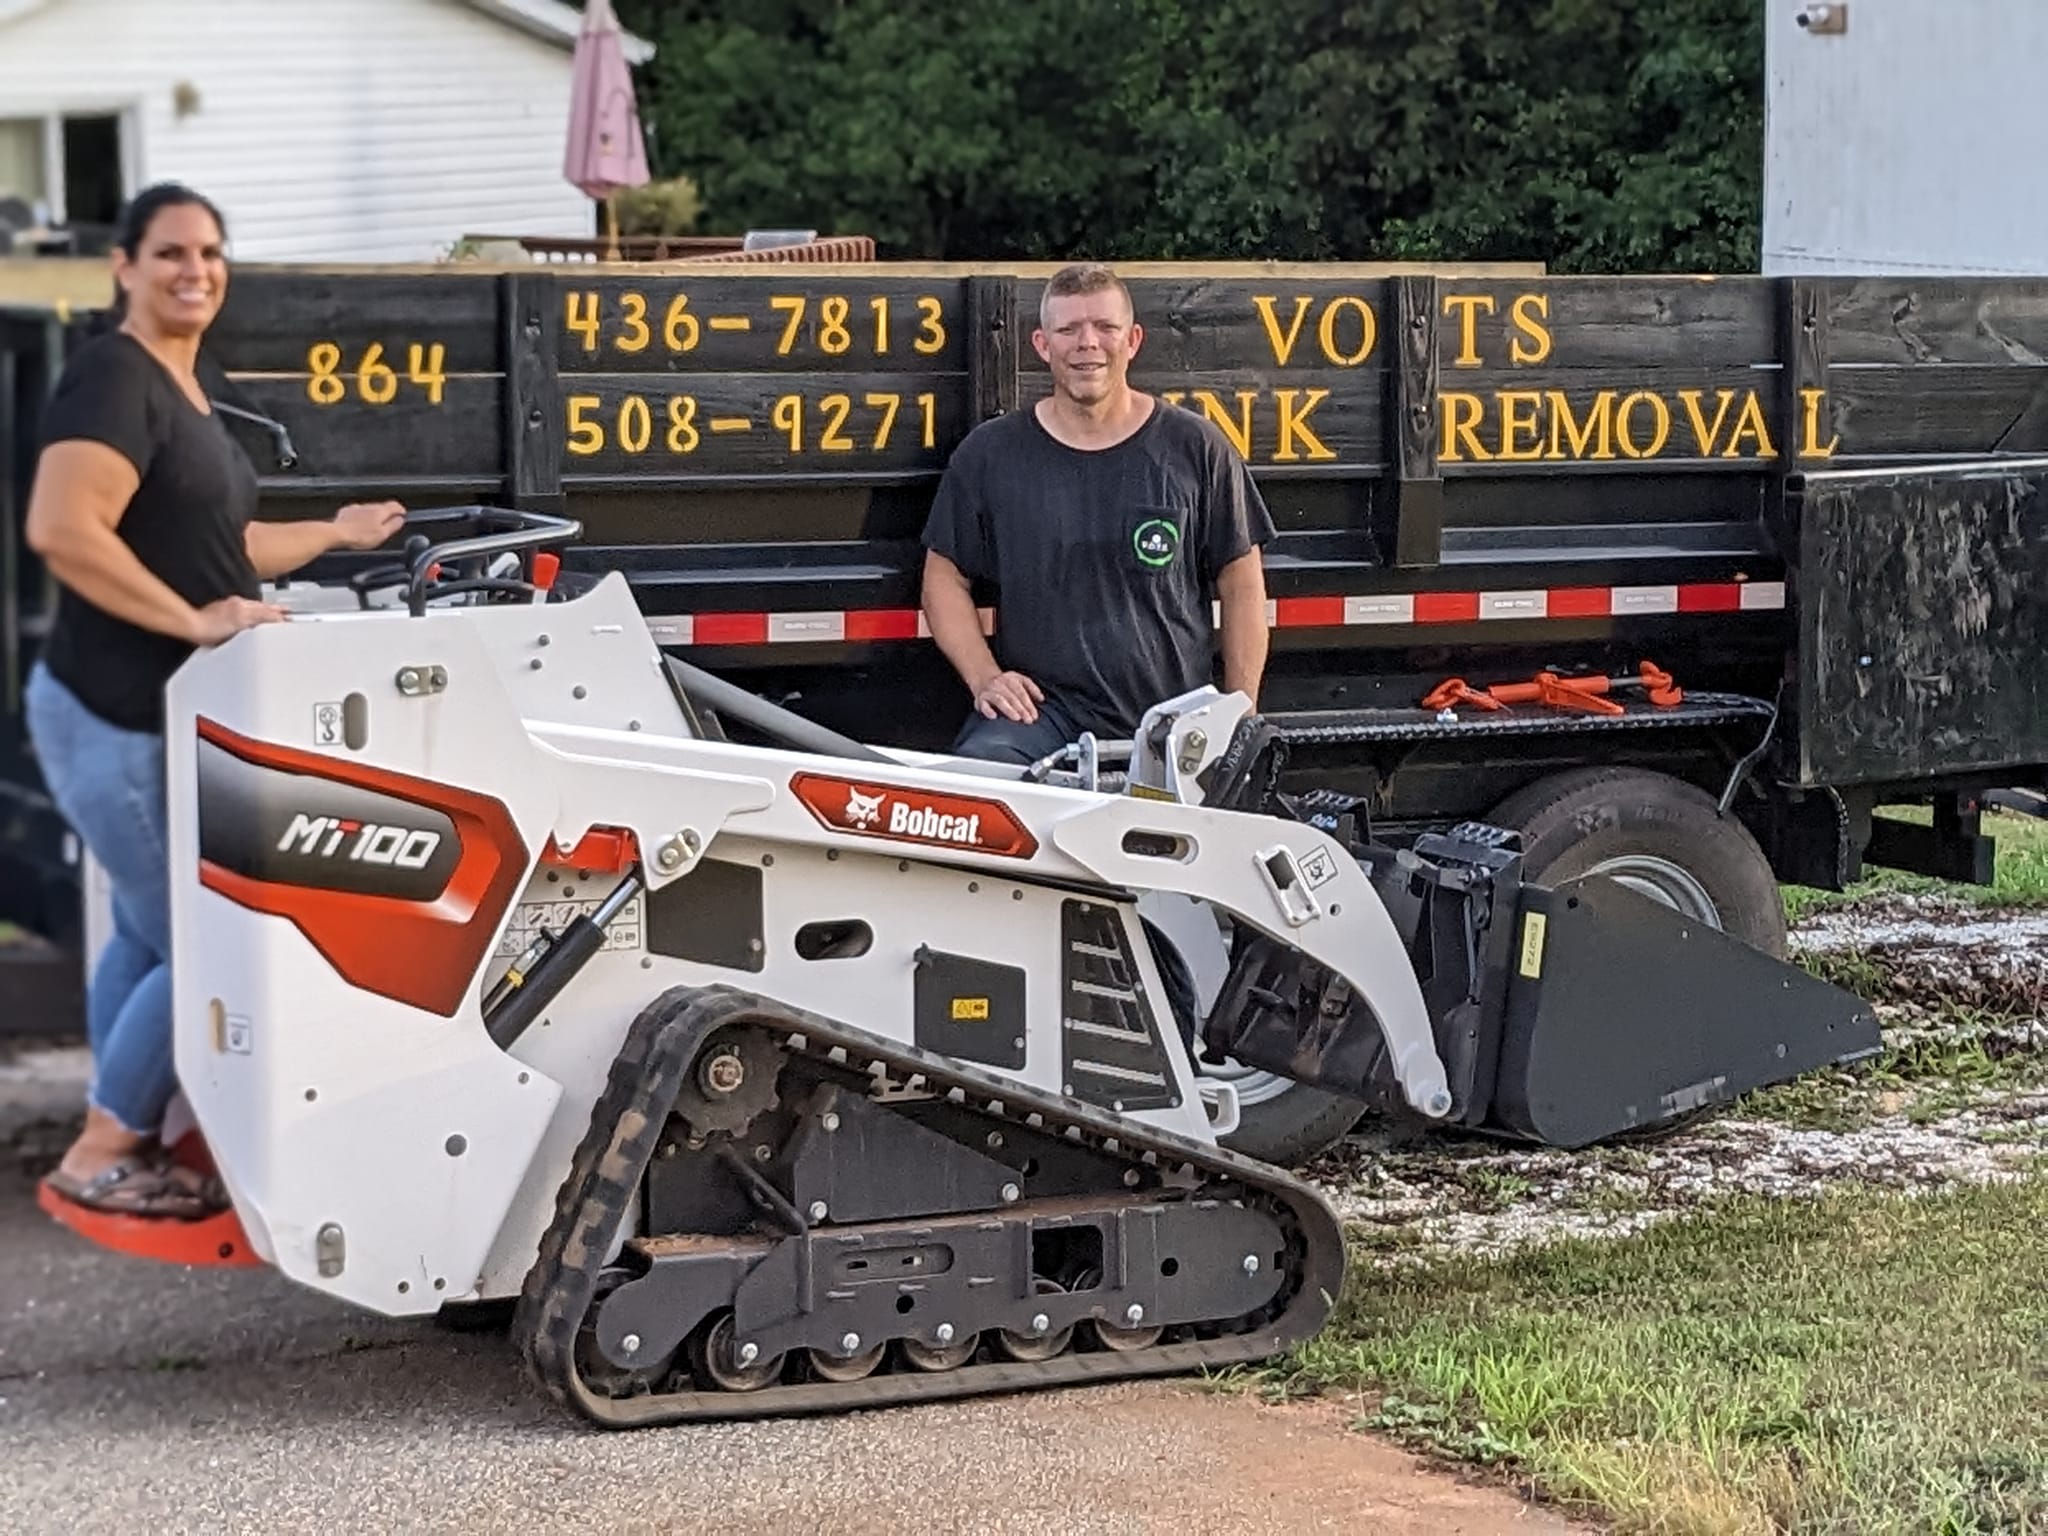 VOTS Junk Removal is proud to serve all the areas within the Upstate for services of Junk Removal Greenville SC, Junk Removal Anderson SC, and Junk Removal Spartanburg SC